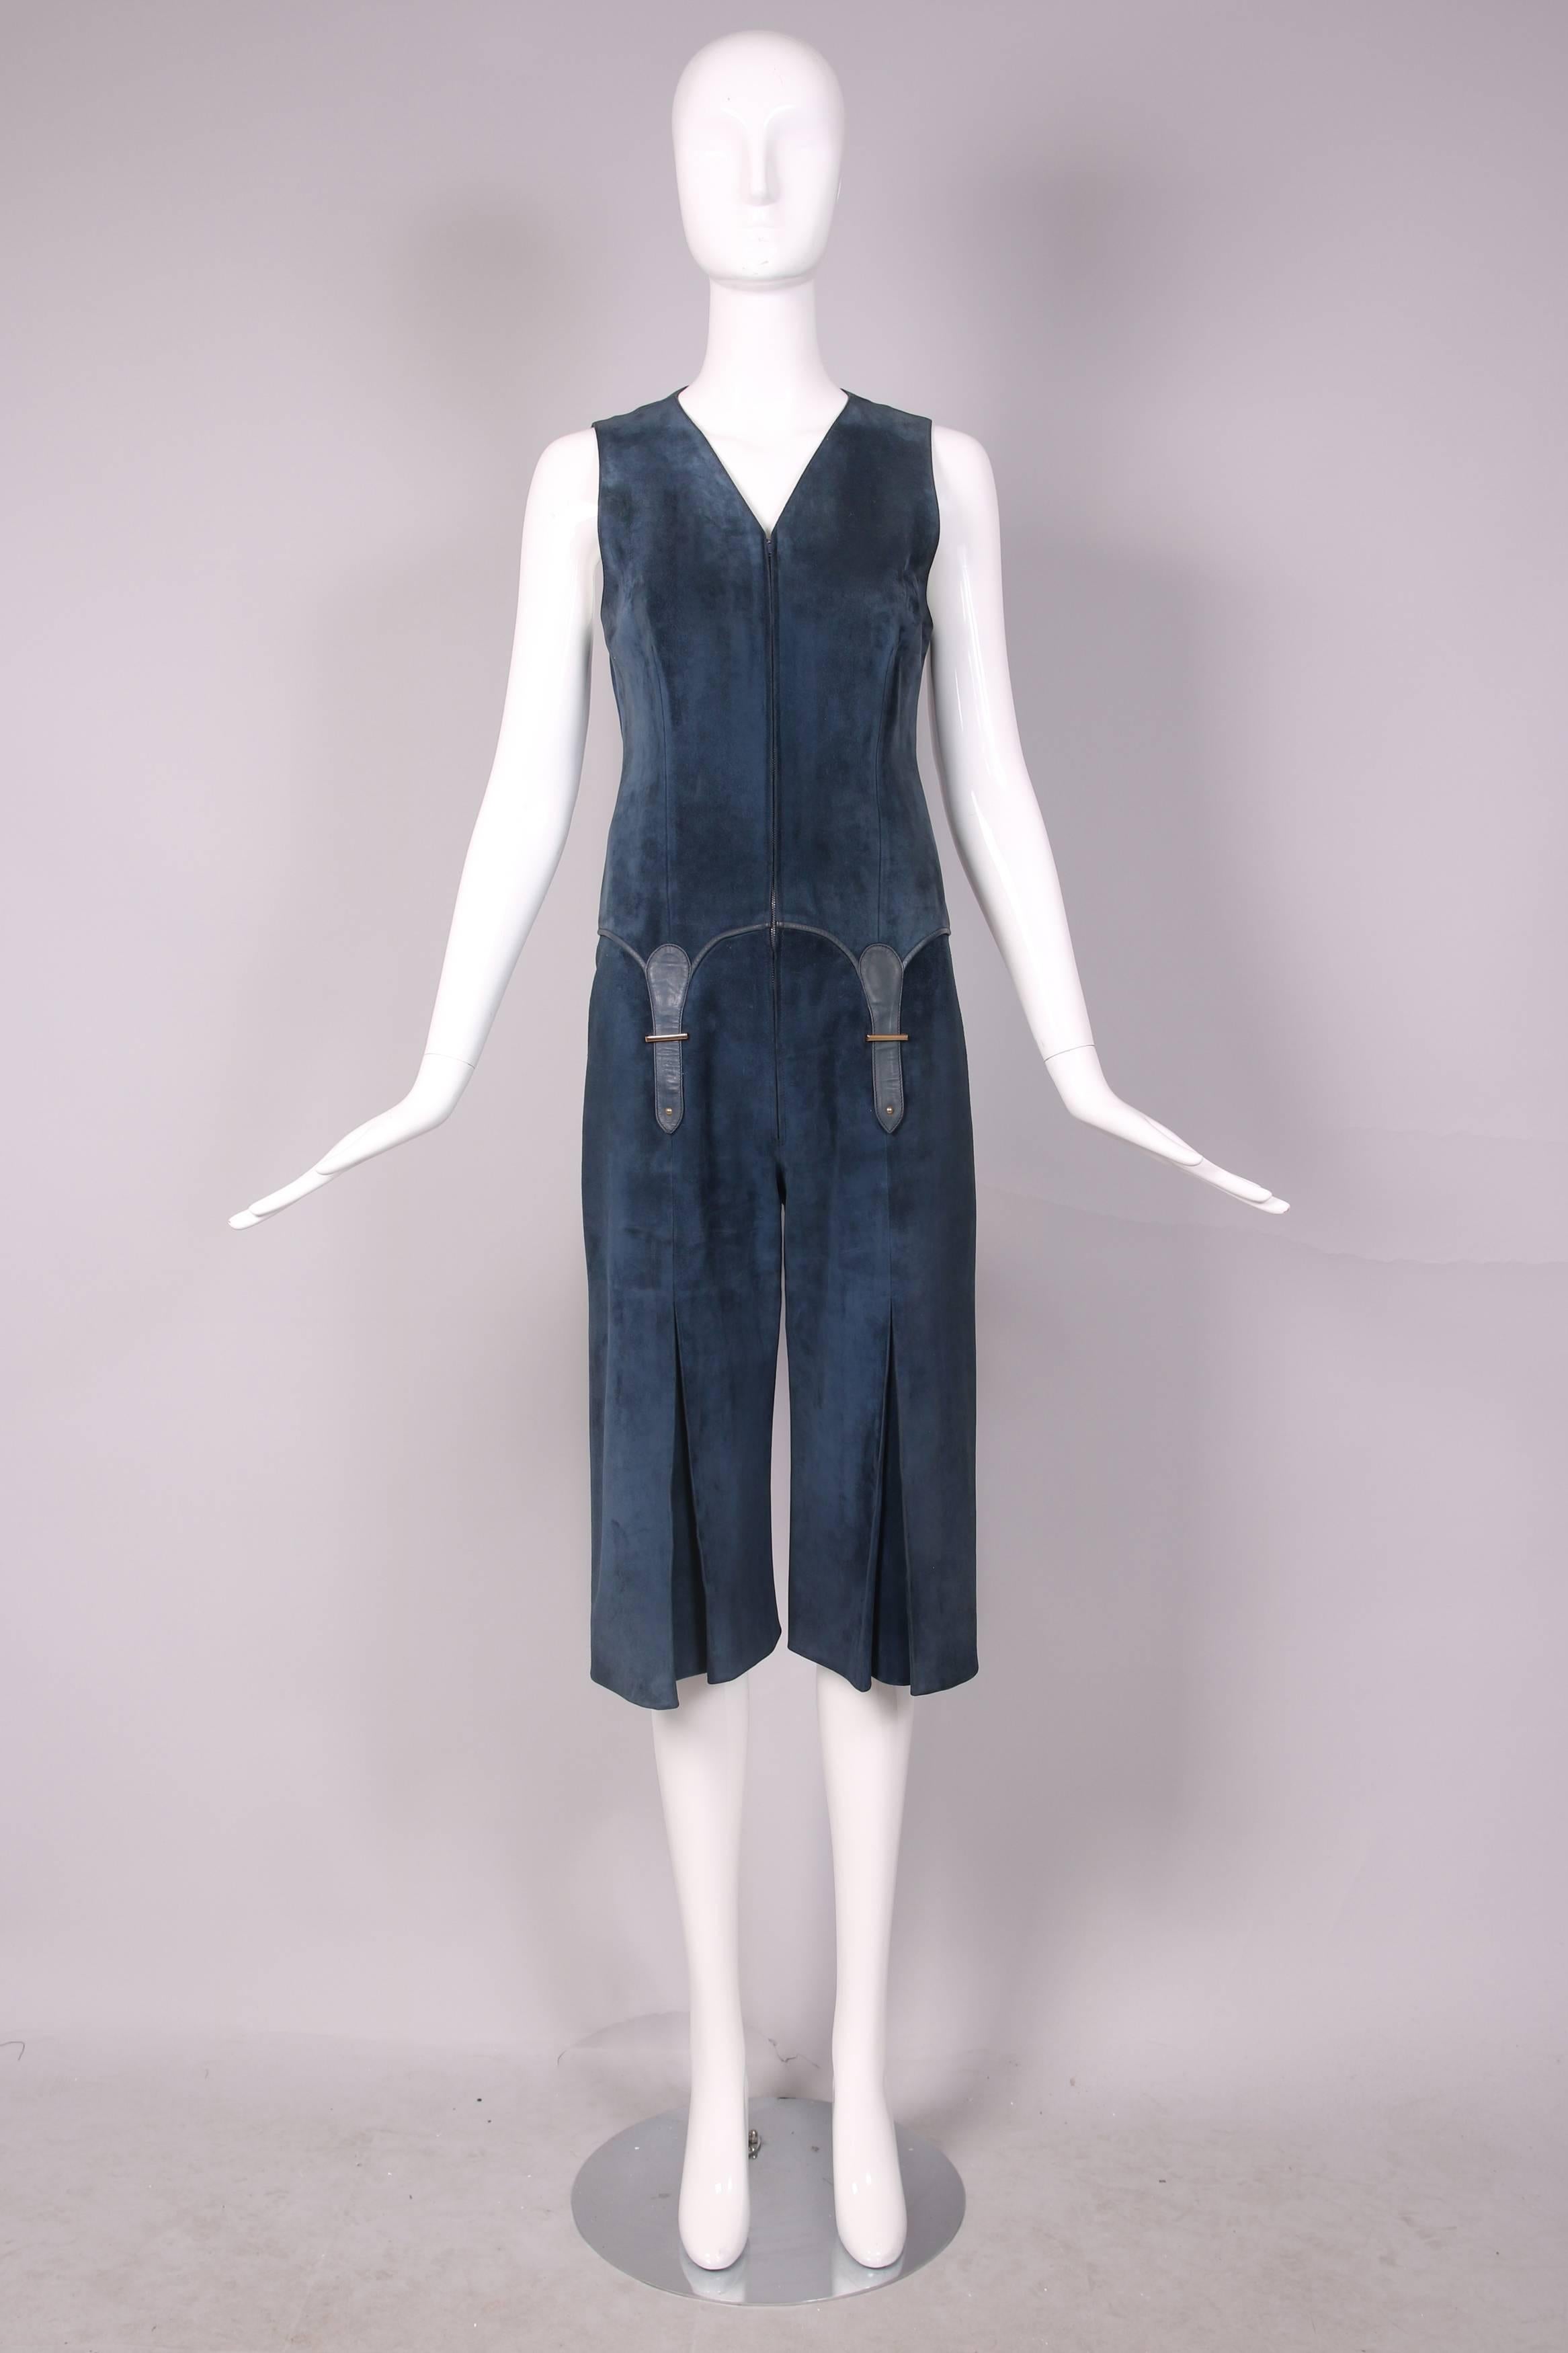 1970’s Gucci navy blue suede sleeveless jumpsuit that hits at the knee and features frontal decorative buckles as well as a kick pleat at the bottom front of each leg. Entirely lined in Gucci logo silk fabric. In excellent condition.